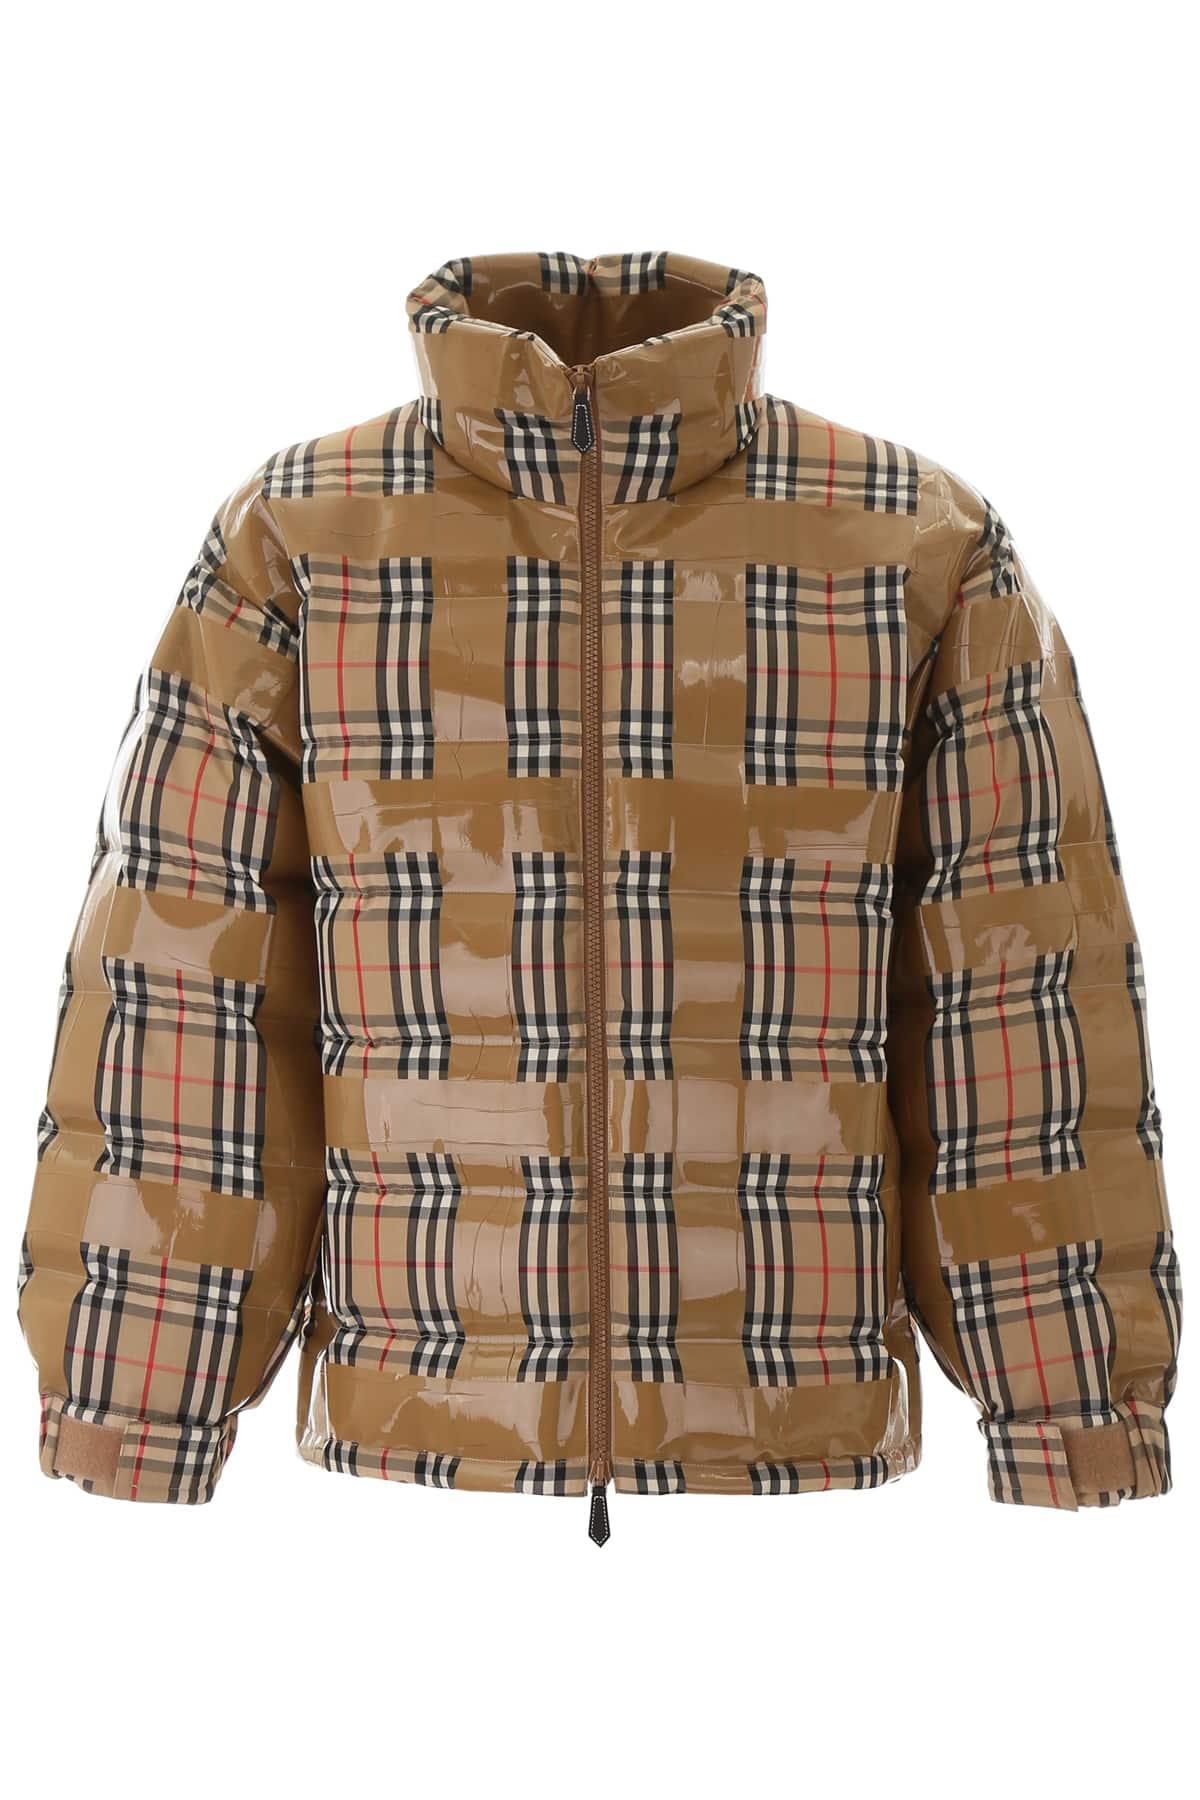 Burberry Tape Vintage Check Puffer Jacket in Natural for Men | Lyst UK